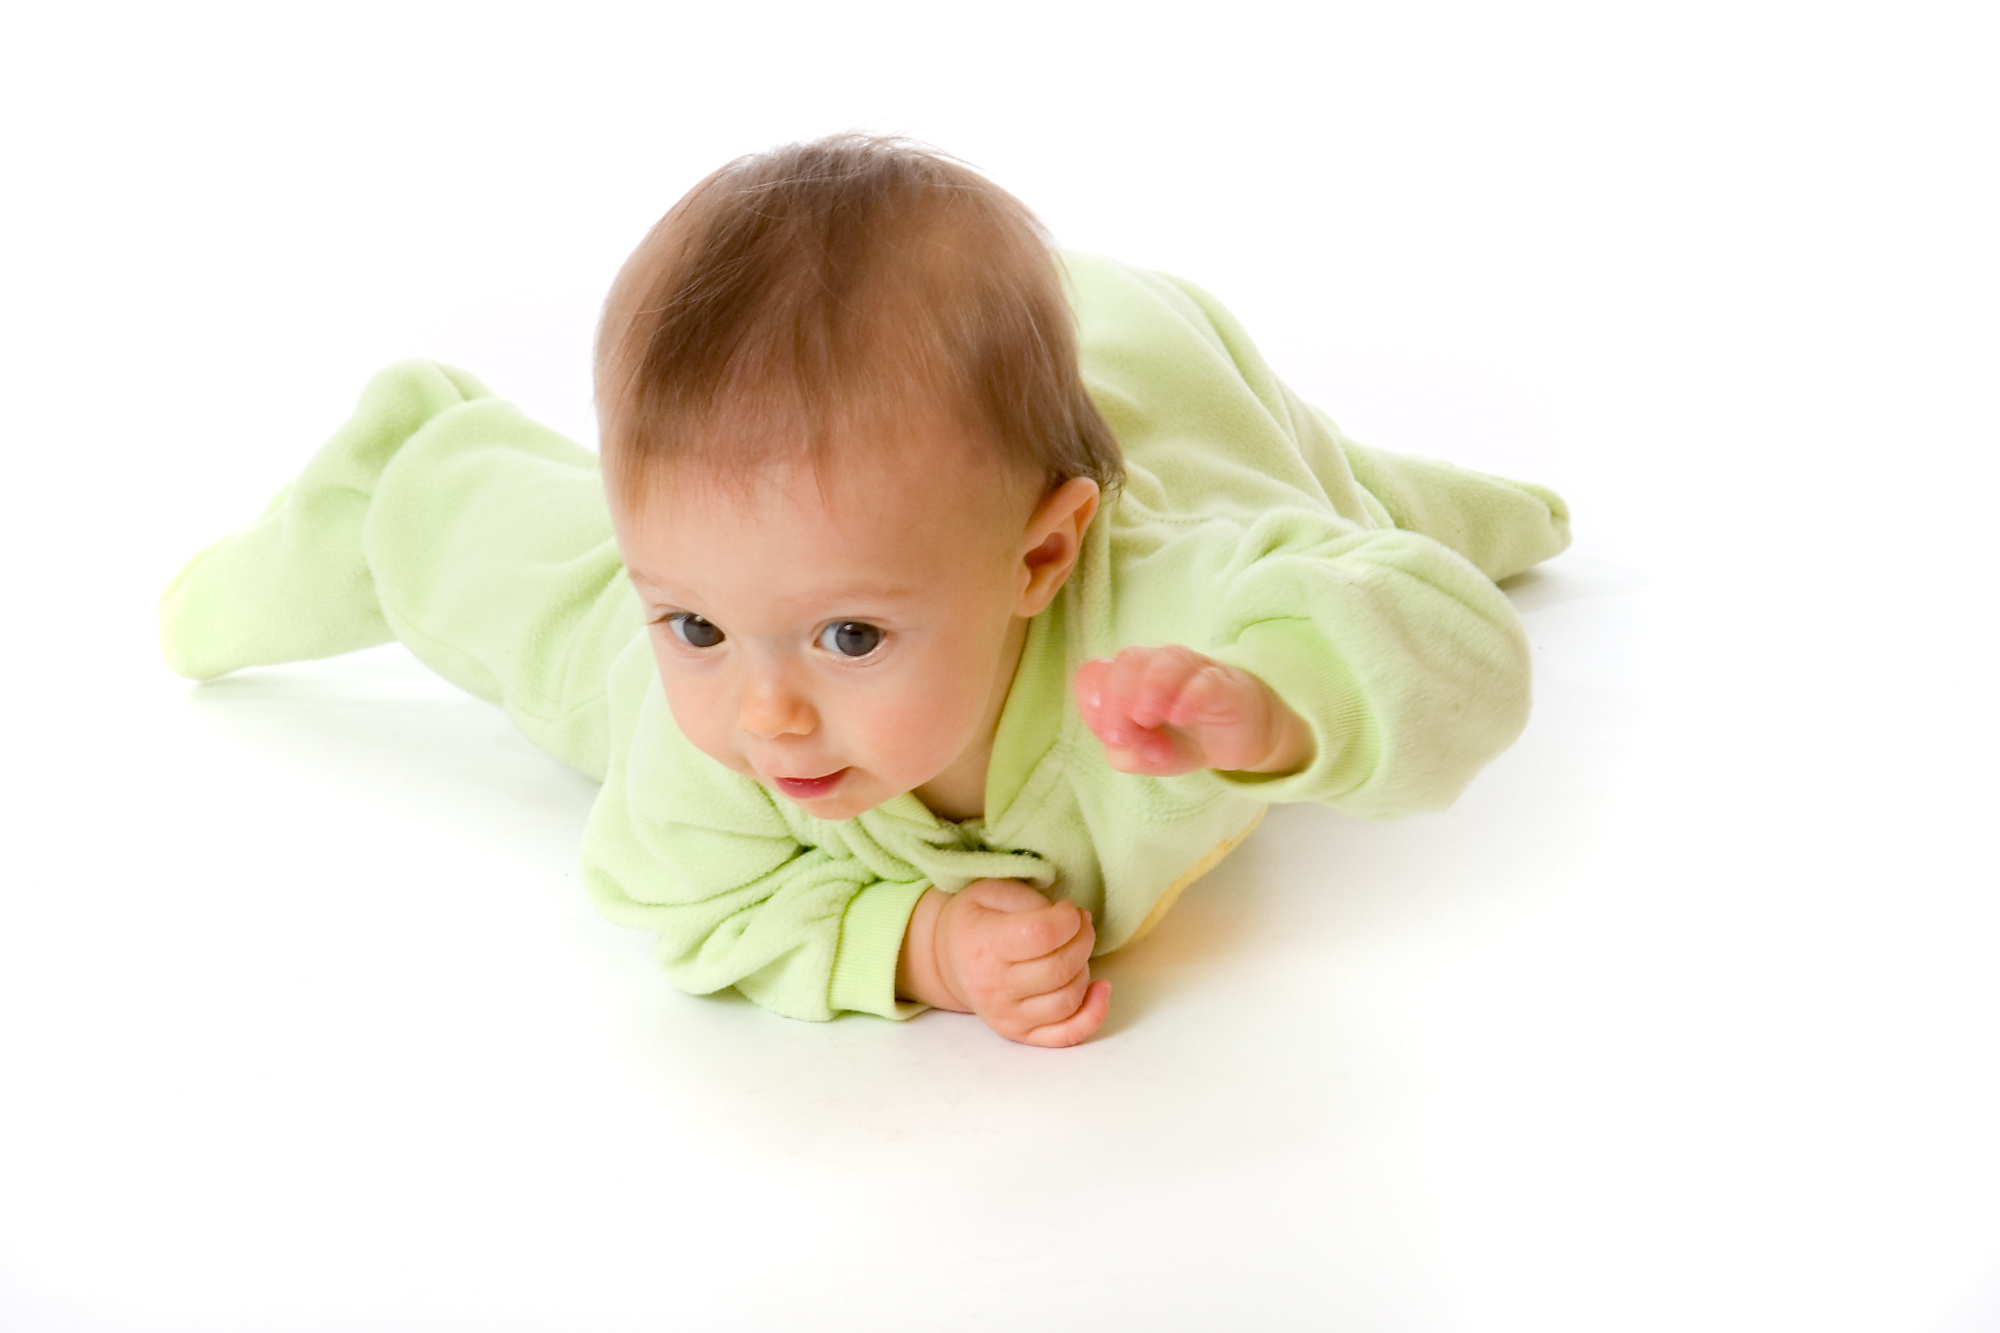 Belly crawl is another type of baby crawl that baby can do when they develop enough core strength